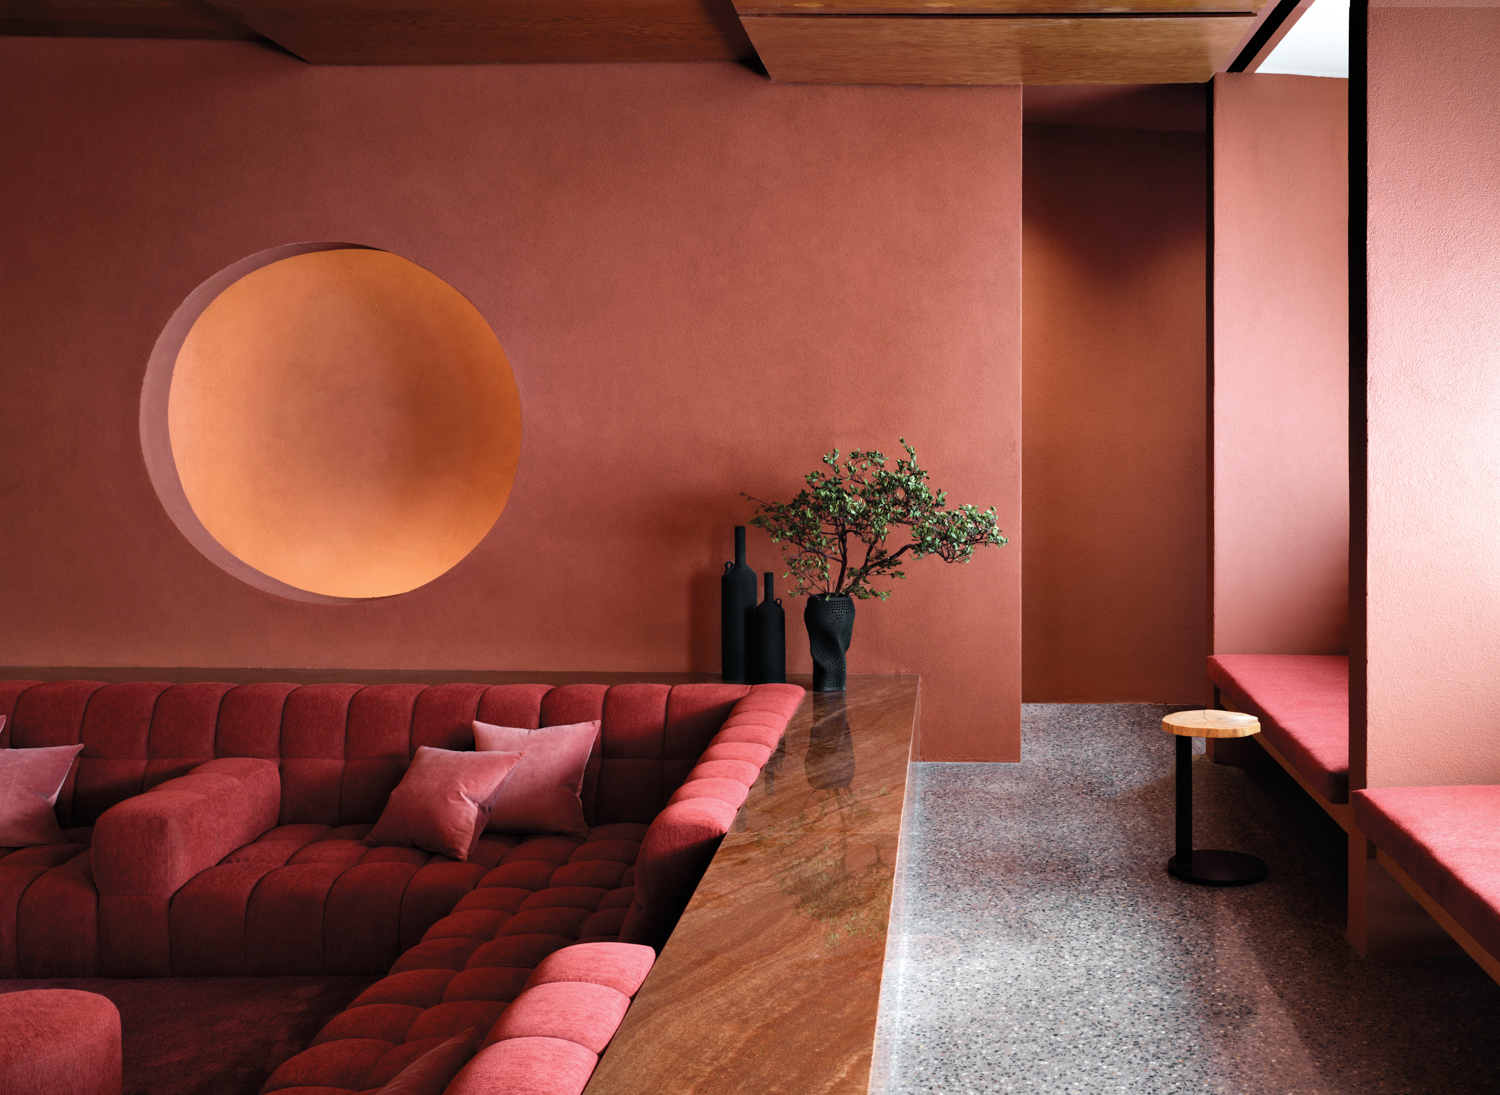 Mii amo lounge area with red walls, a sunken sitting area with a red, tufted sofa and stone accents